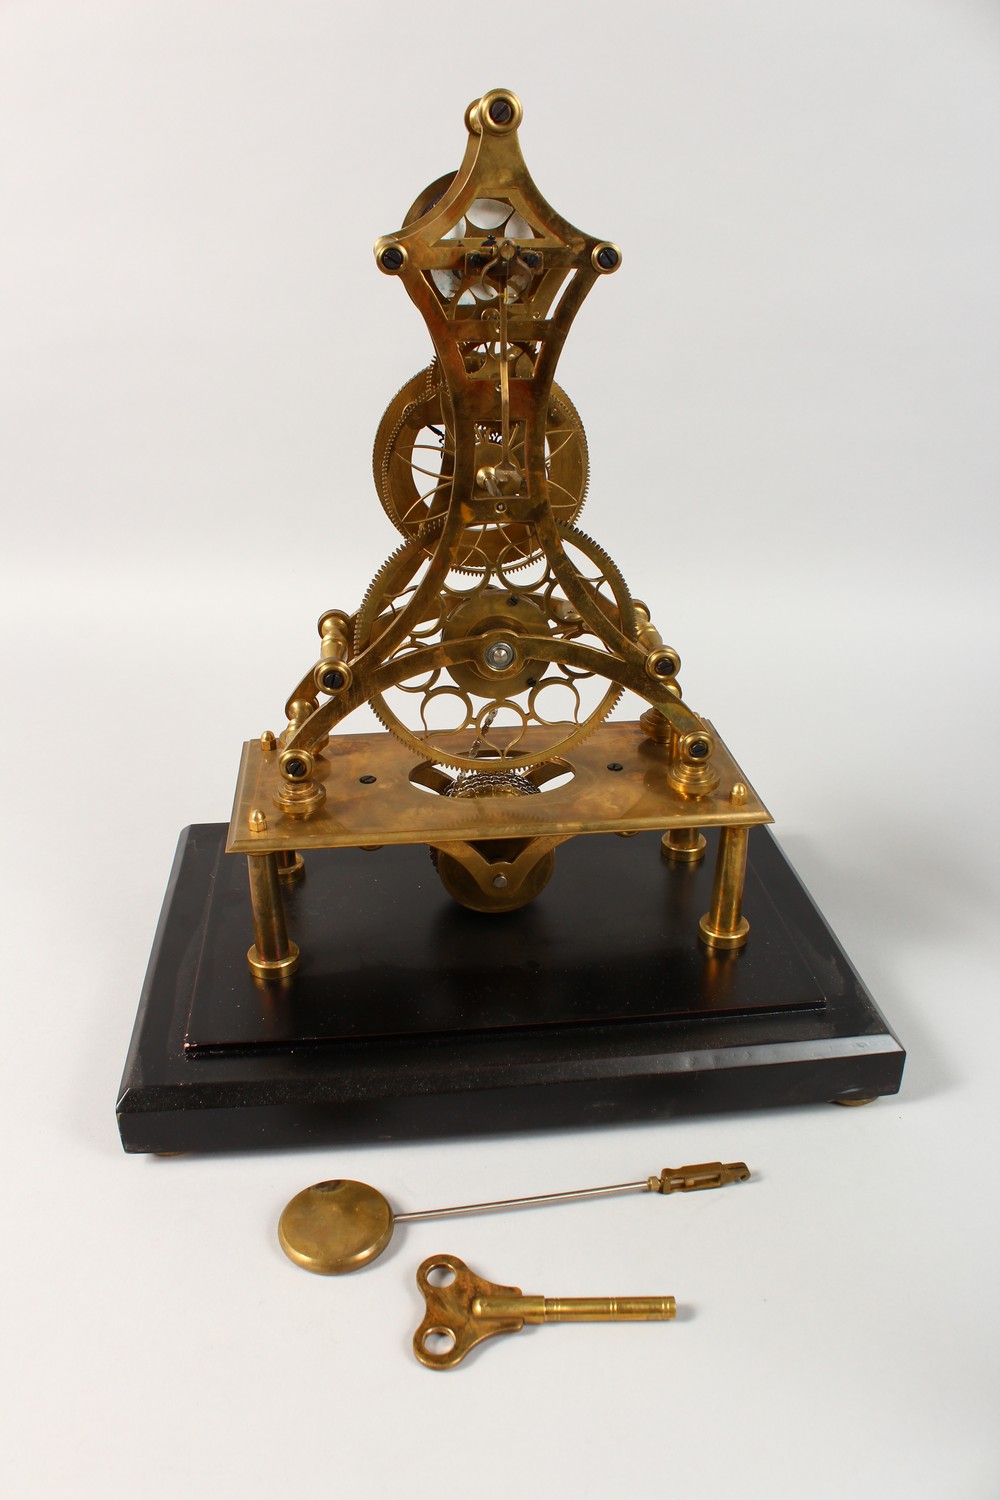 A MOON PHASE SKELETON CLOCK in a glass case. 17.5ins high including case. - Image 10 of 10